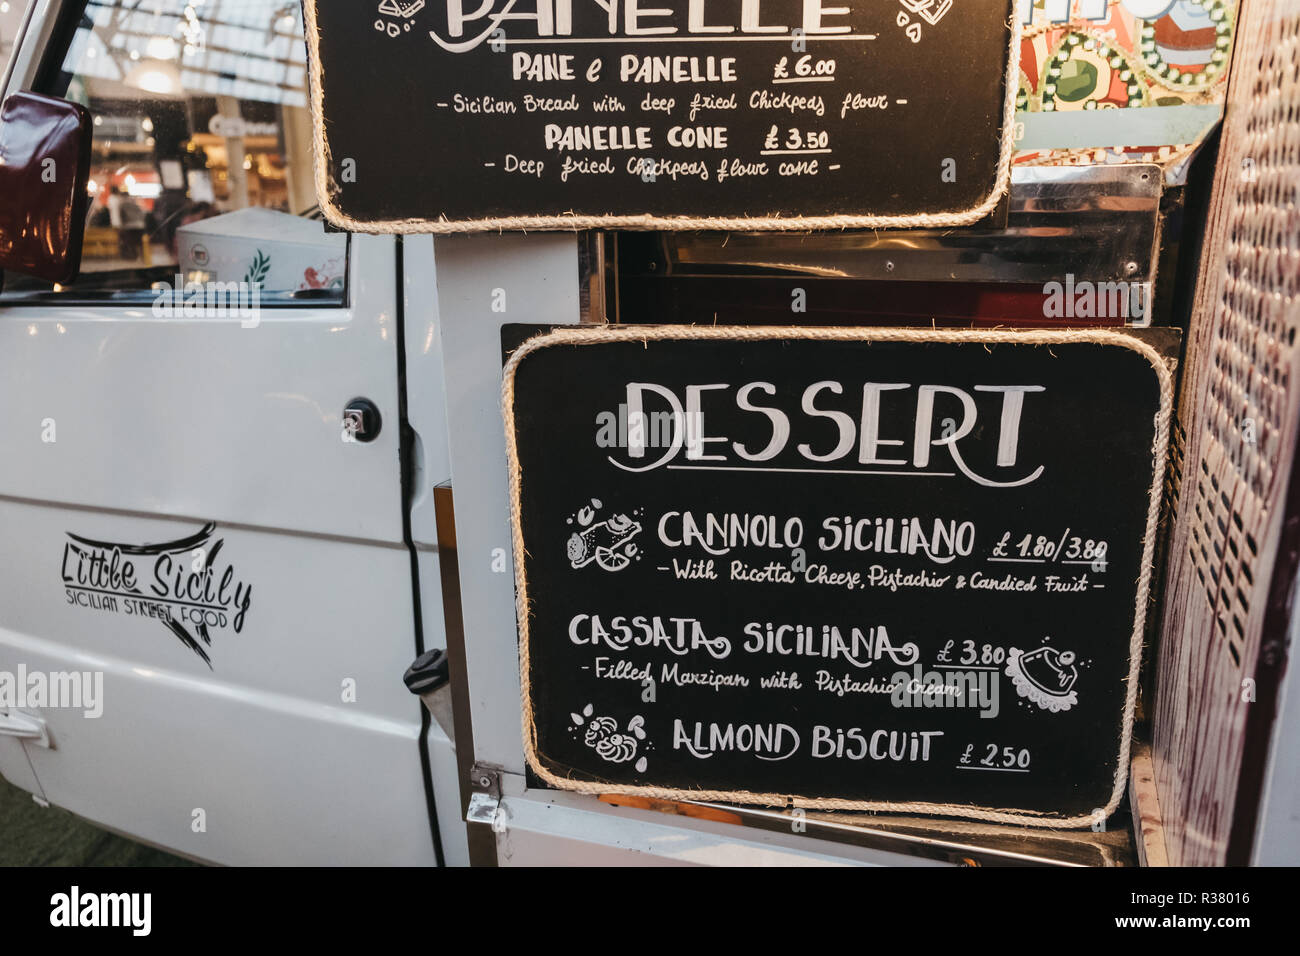 London,UK - November 2,2018: Dessert menu at Little Sicily stand in Mercato Metropolitano, the first sustainable community market in London focused on Stock Photo